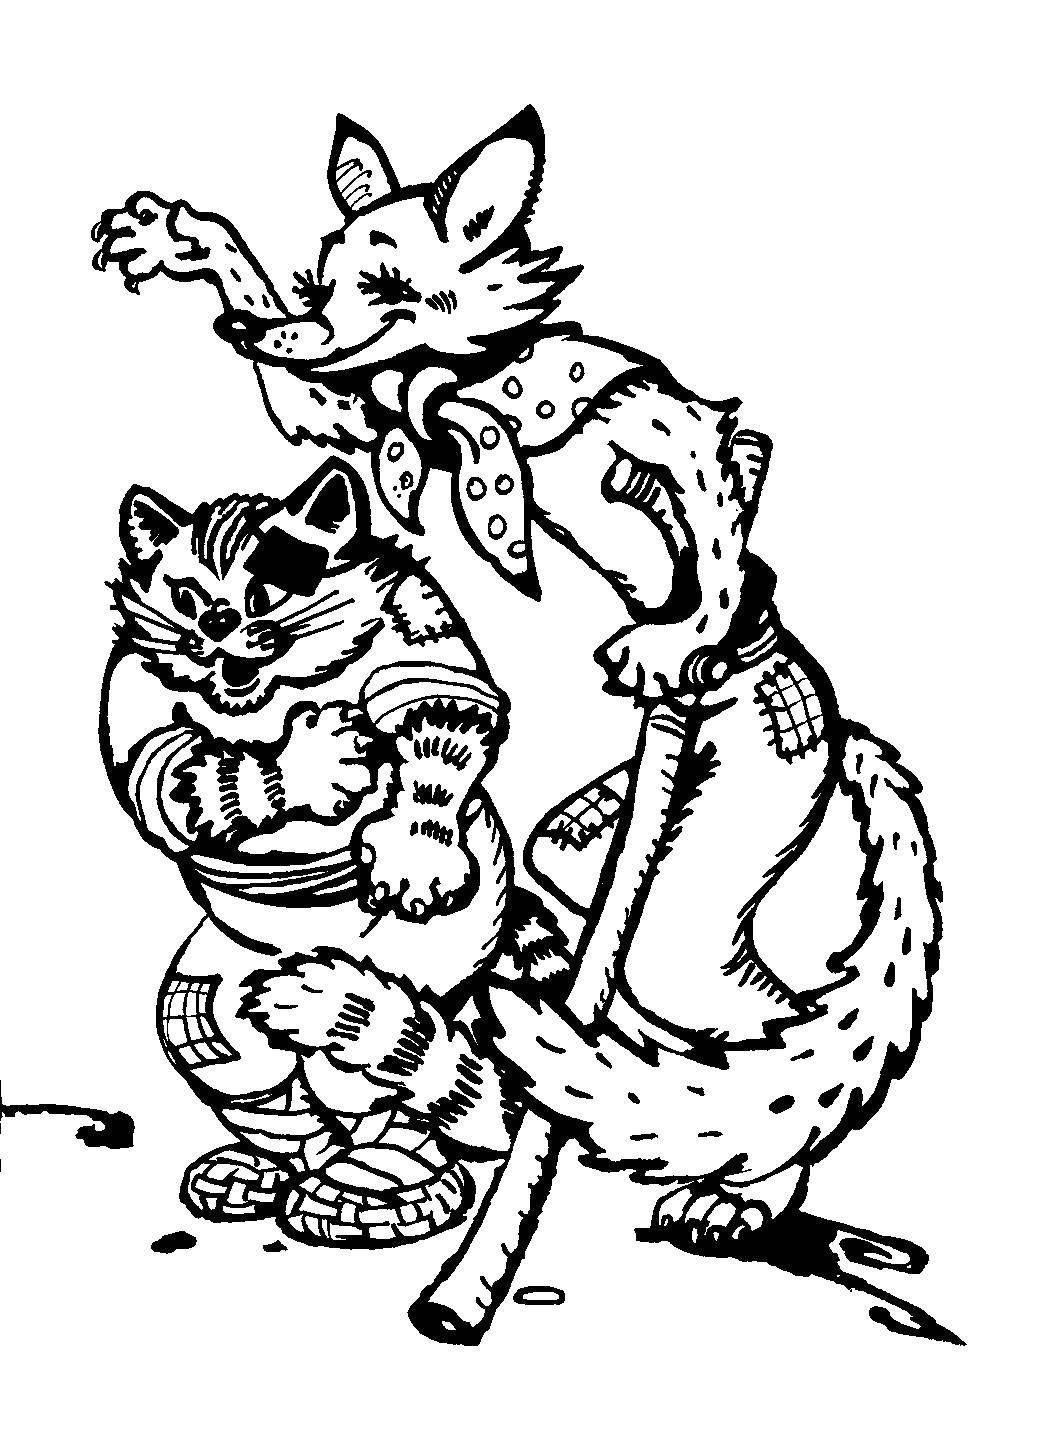 Coloring The cat and the Fox. Category Animals. Tags:  animals, cat, Fox.